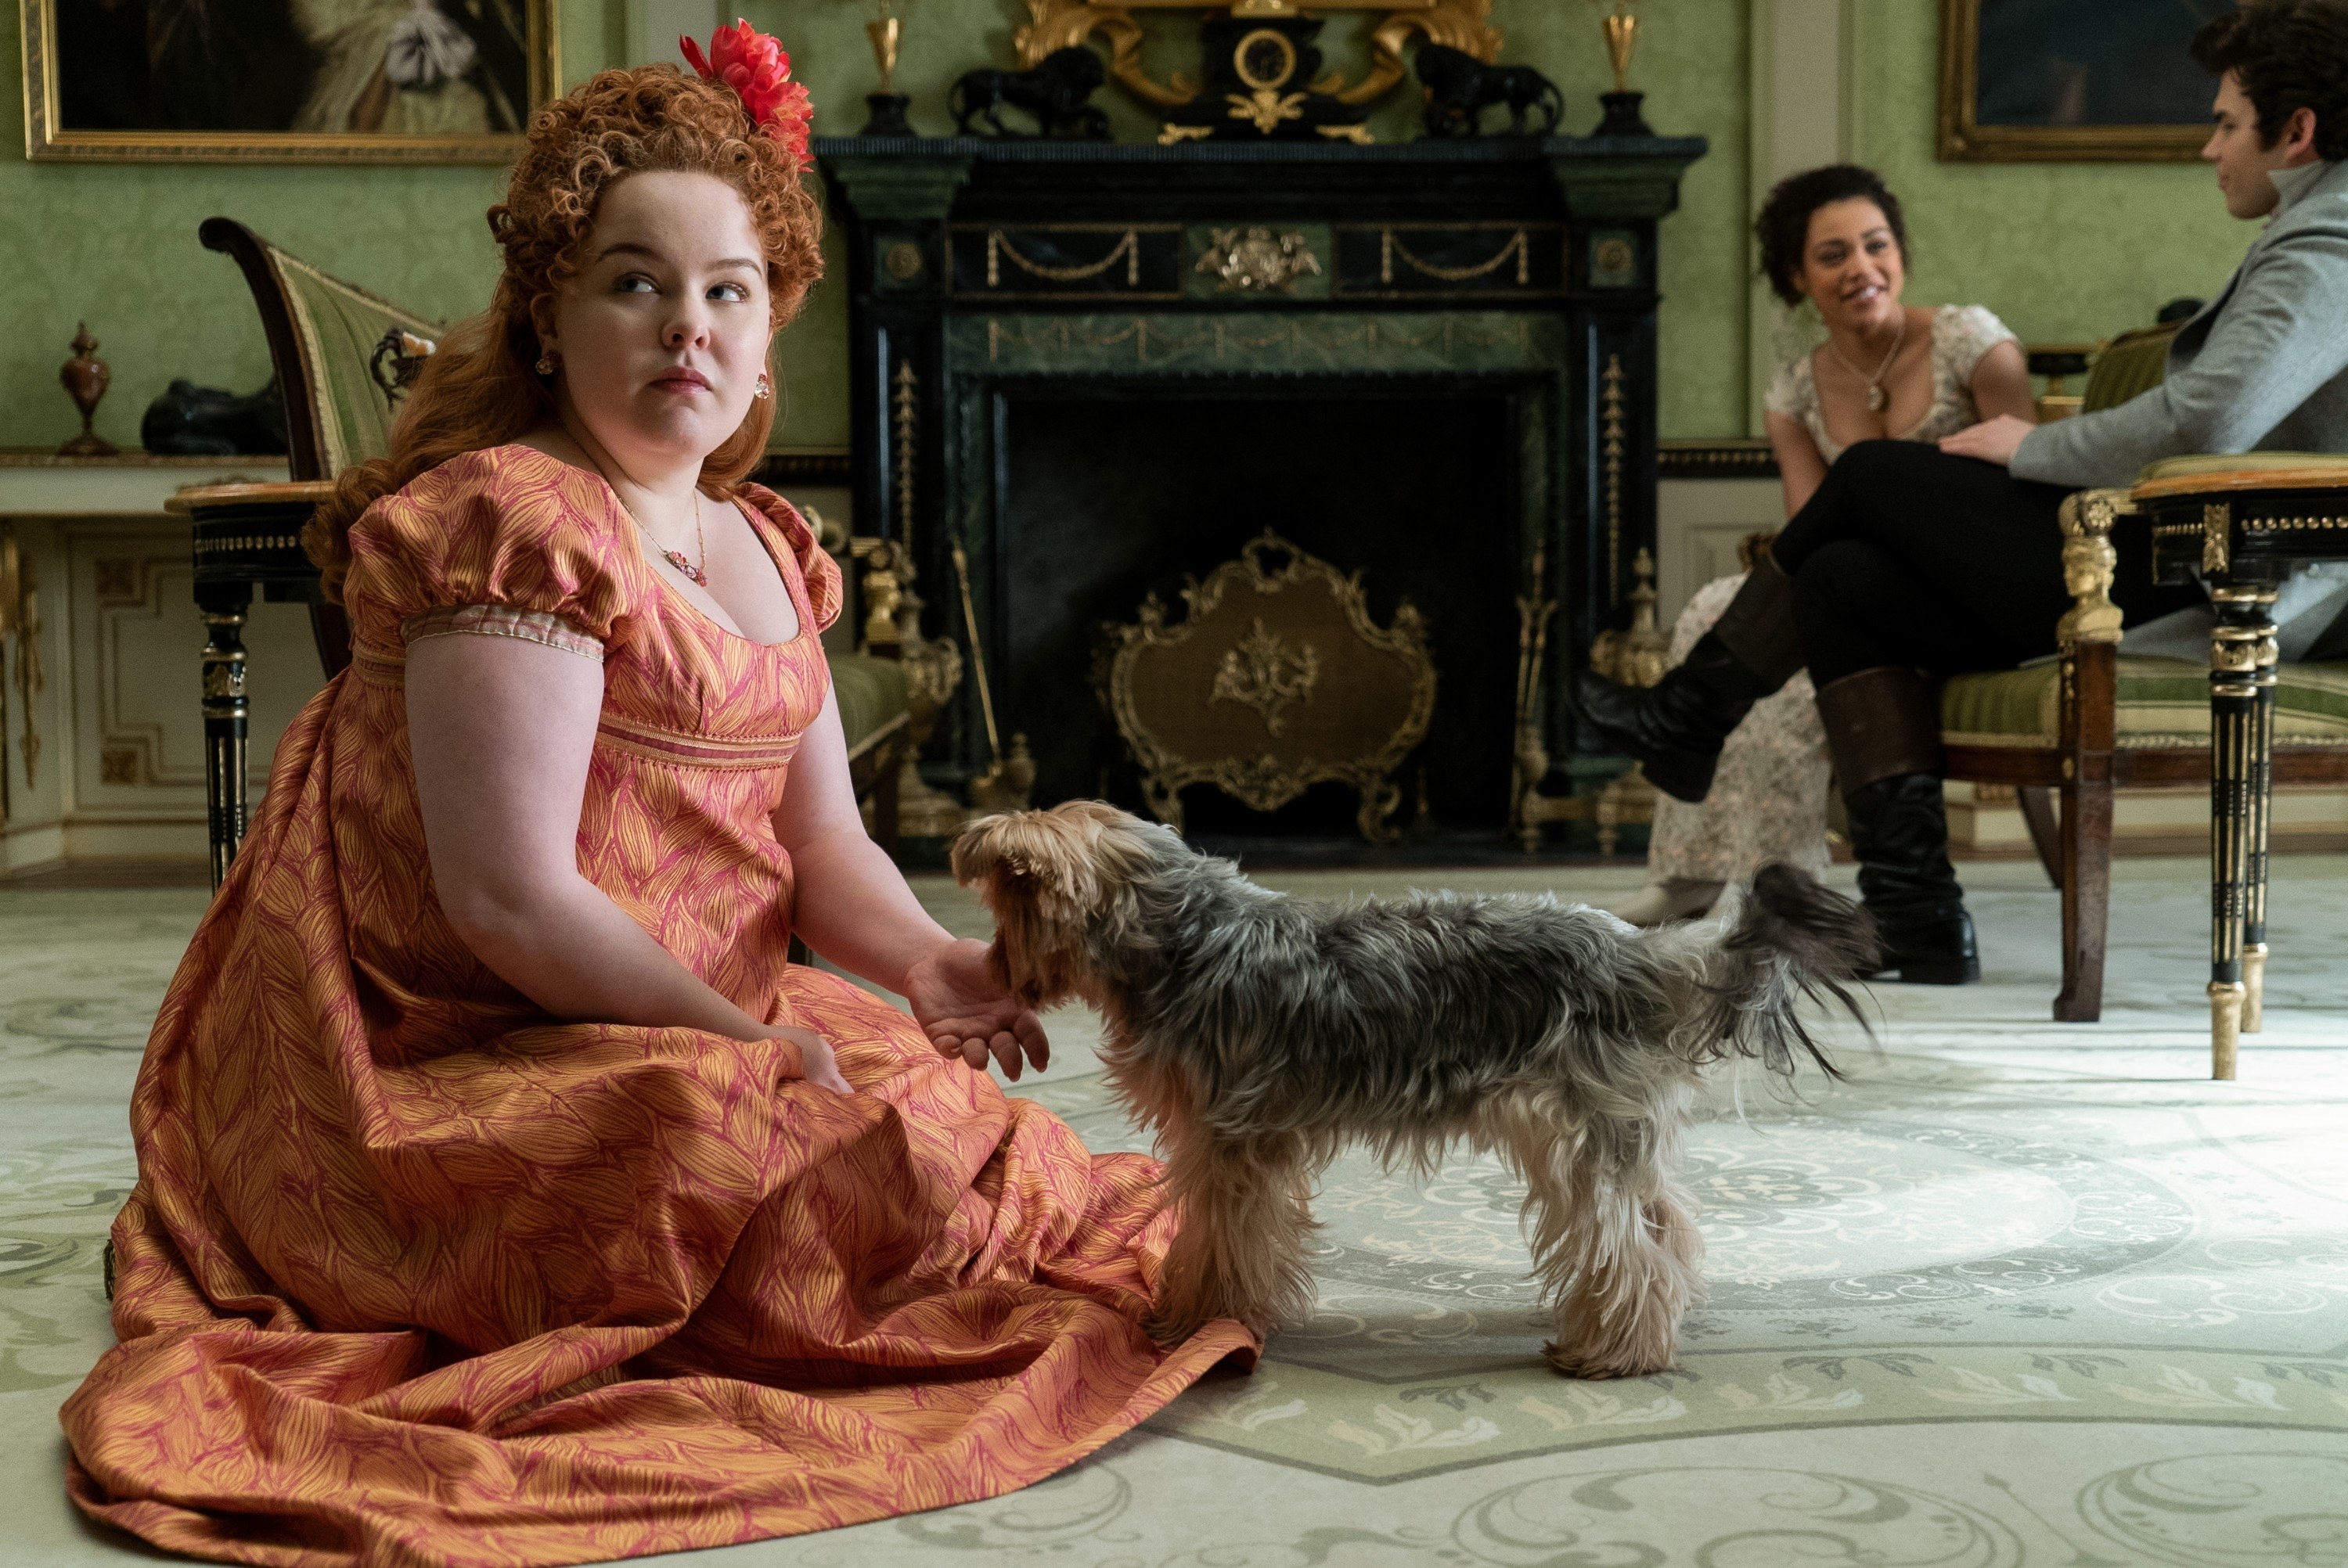 Nicola sitting on the floor with a dog in a scene from Bridgerton